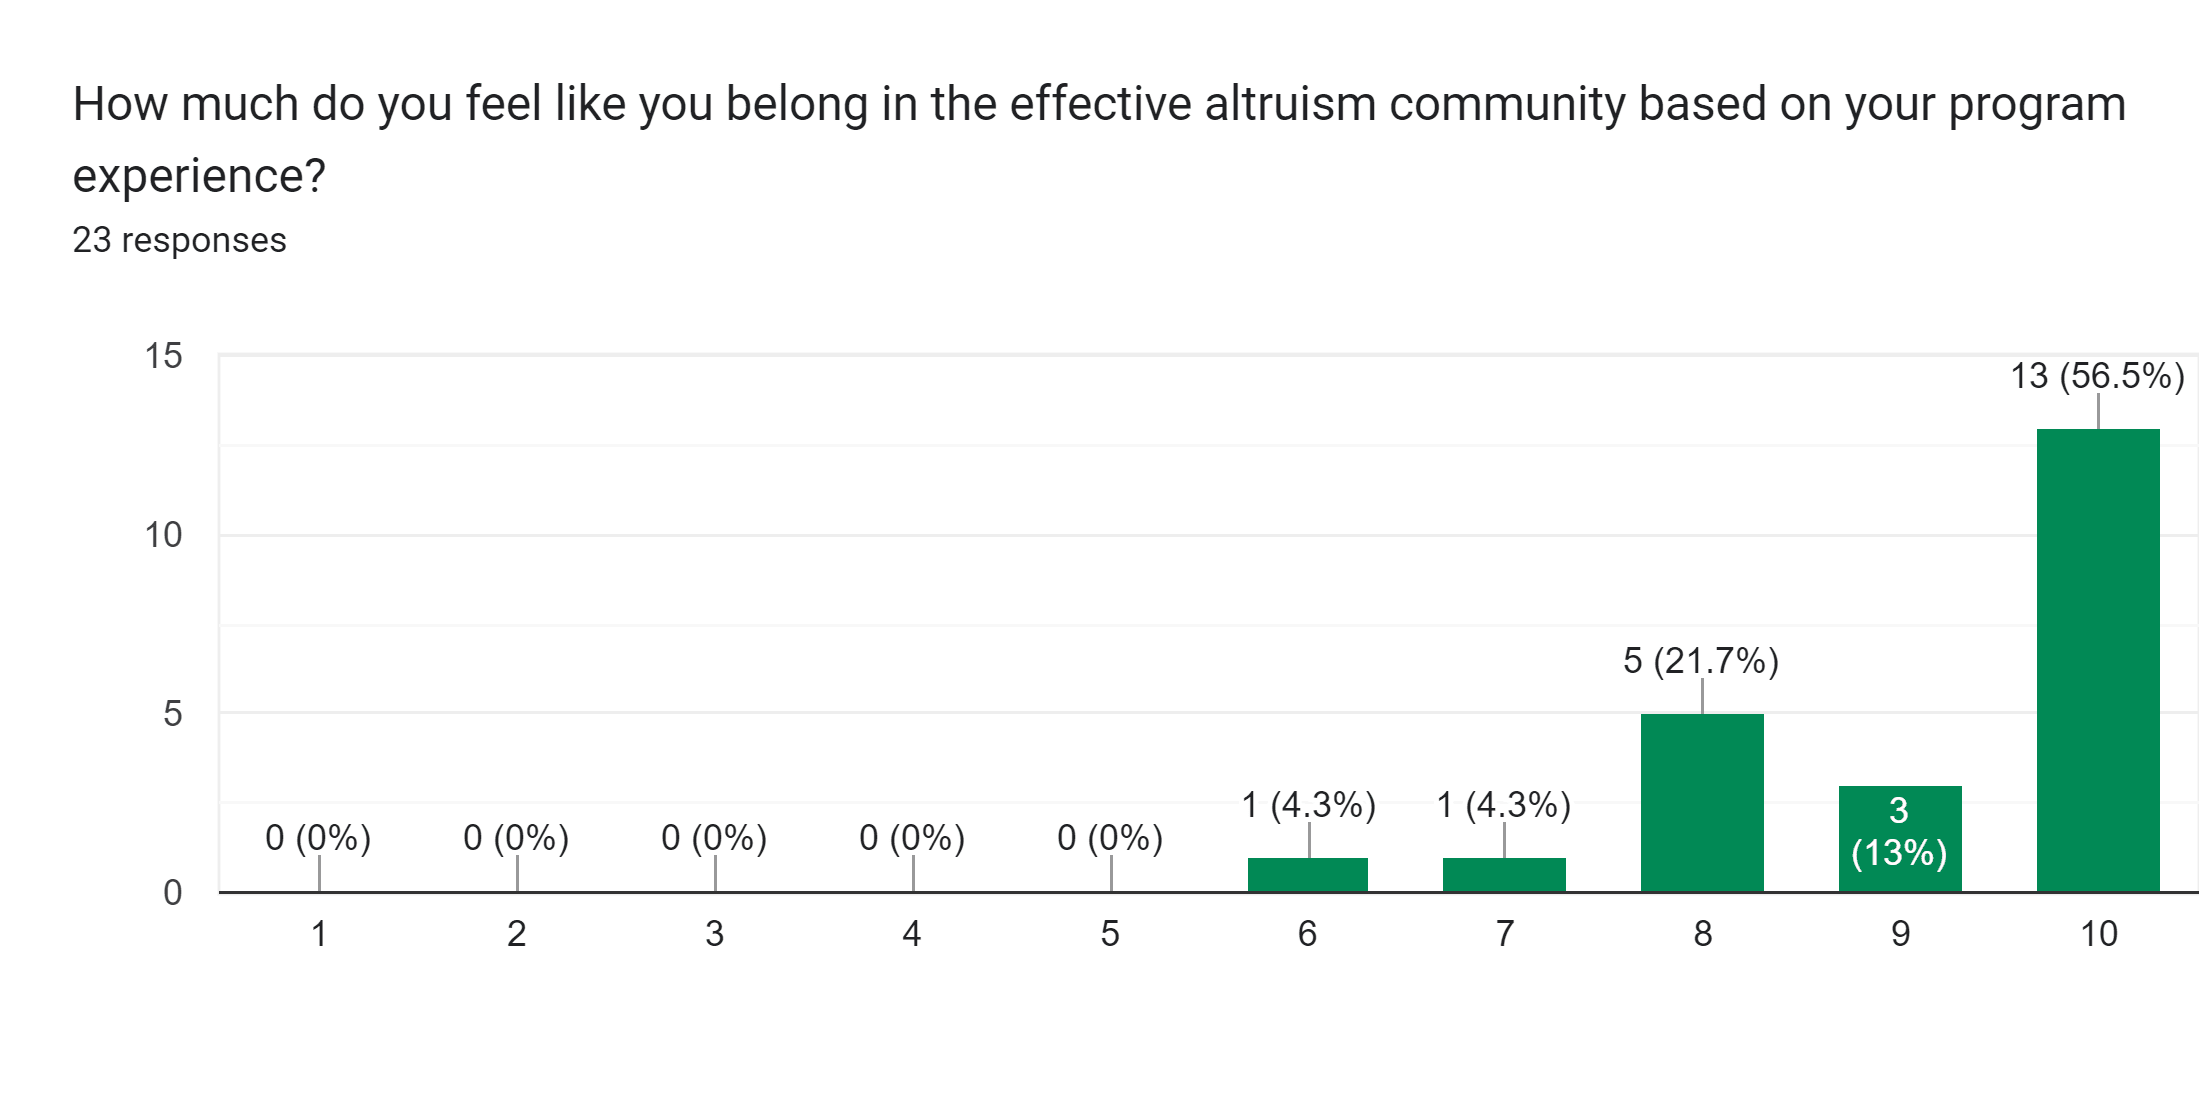 Forms response chart. Question title: How much do you feel like you belong in the effective altruism community based on your program experience?. Number of responses: 23 responses.